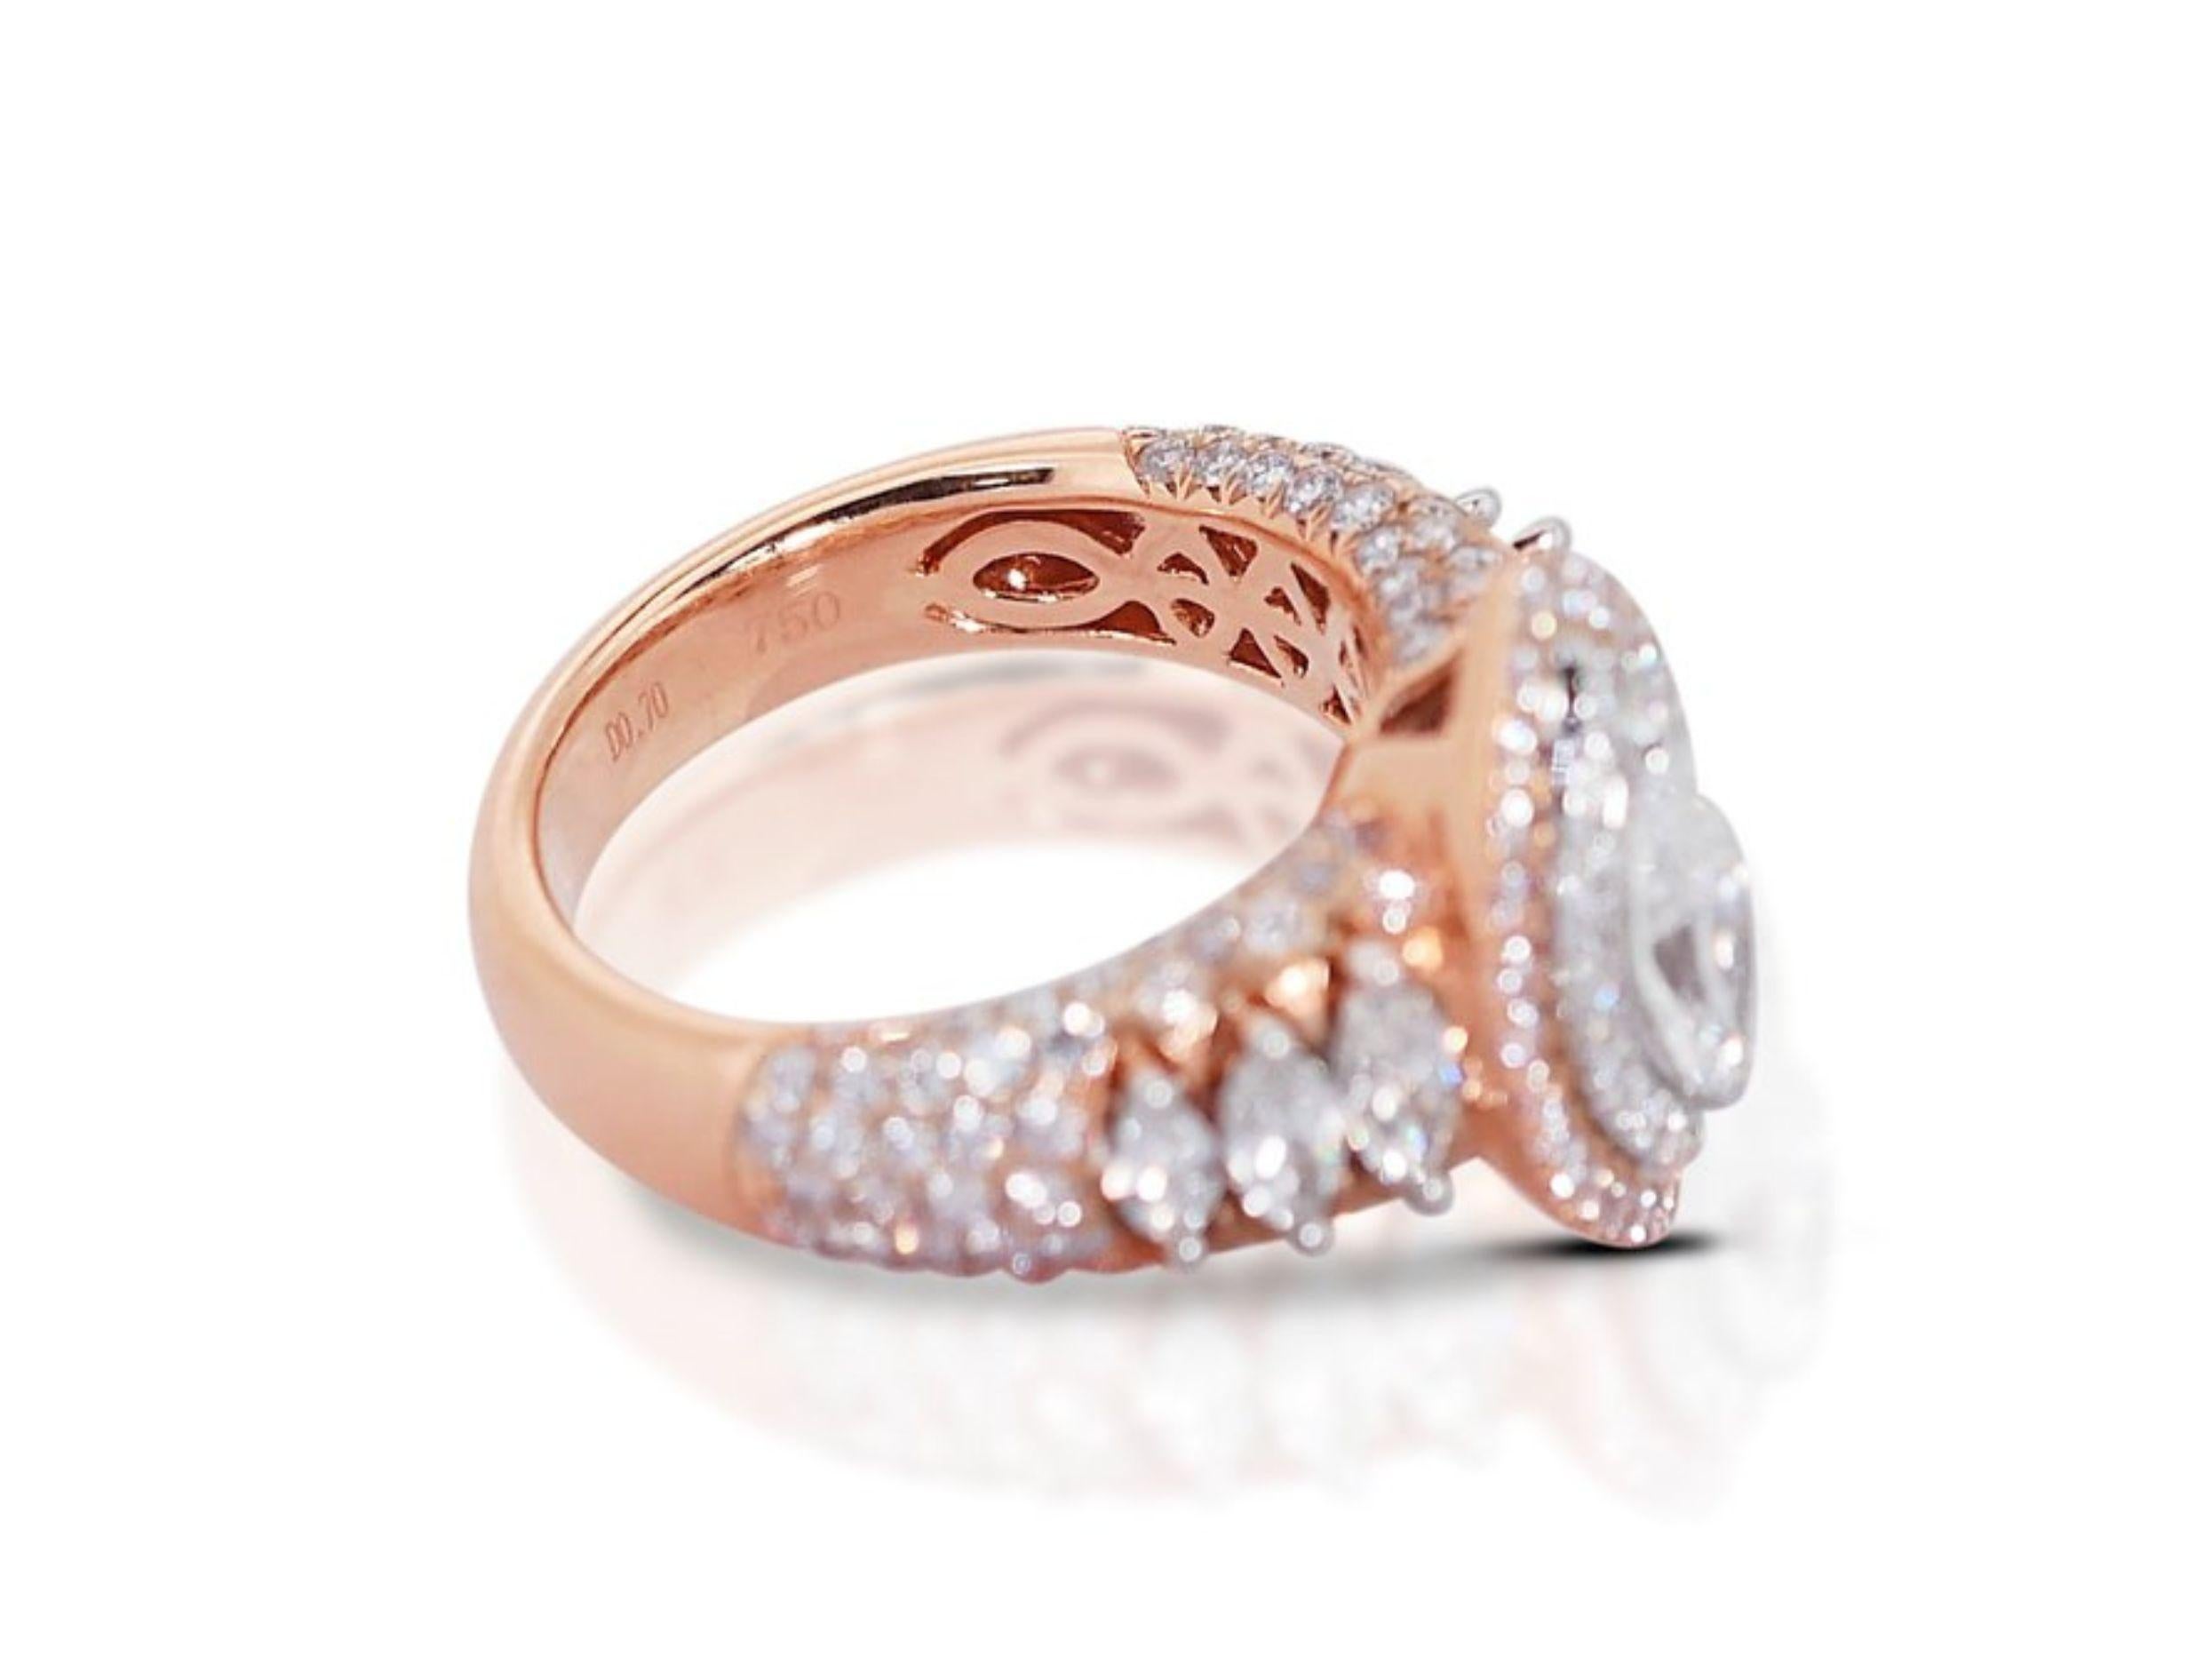 Breathtaking 0.70ct Marquise Diamond Ring in 18K Rose Gold 3